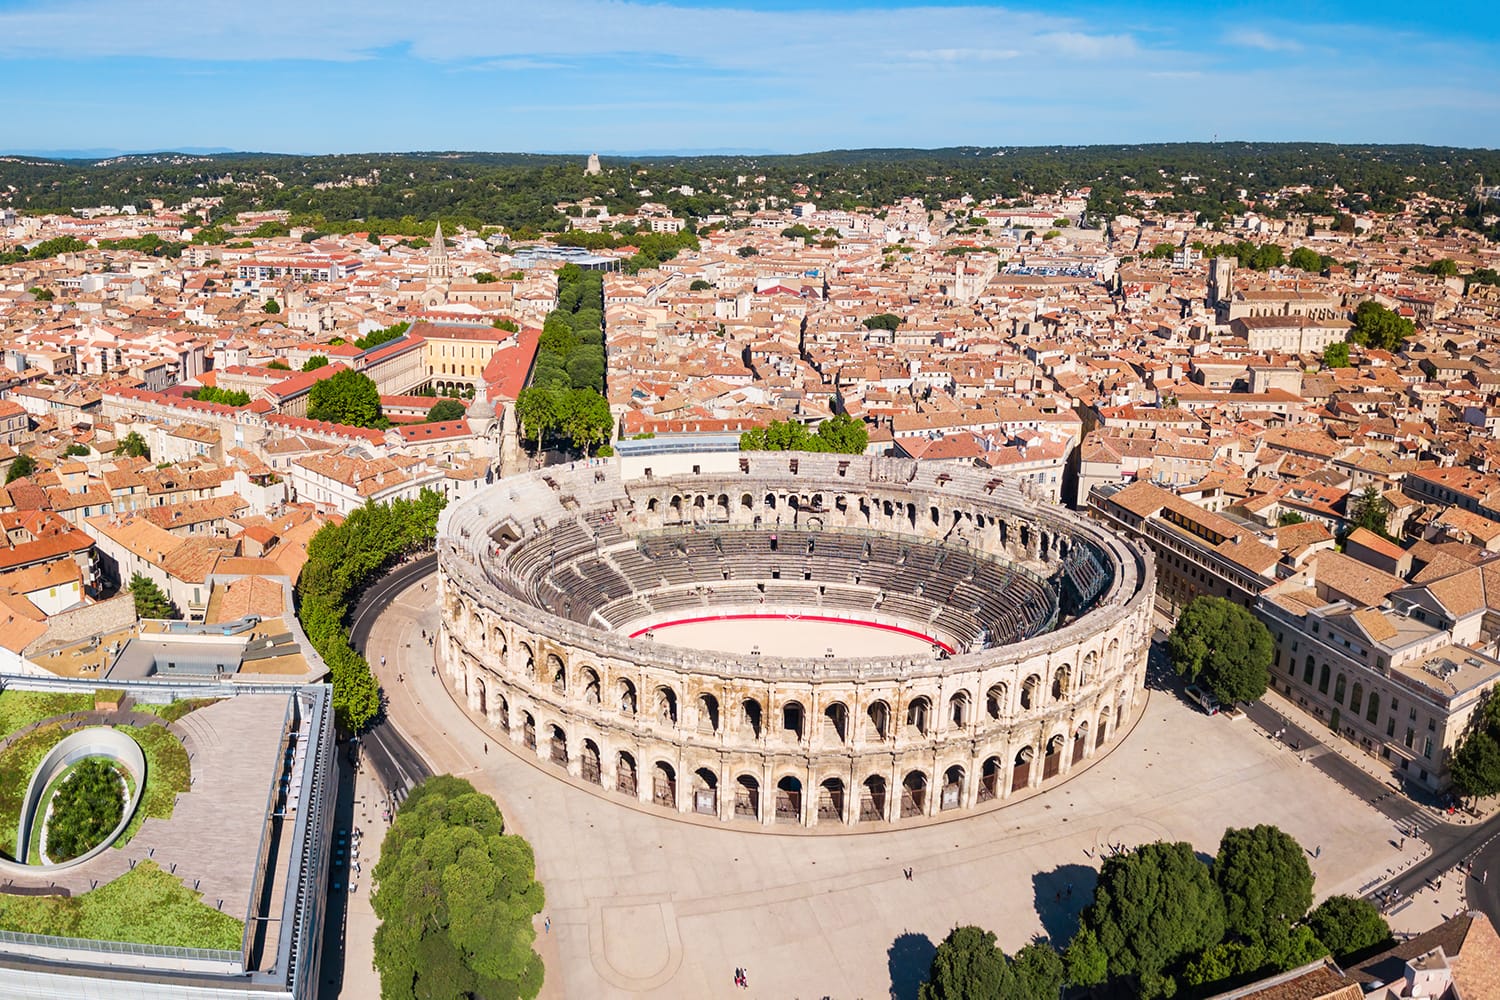 Aerial view of Nimes, France